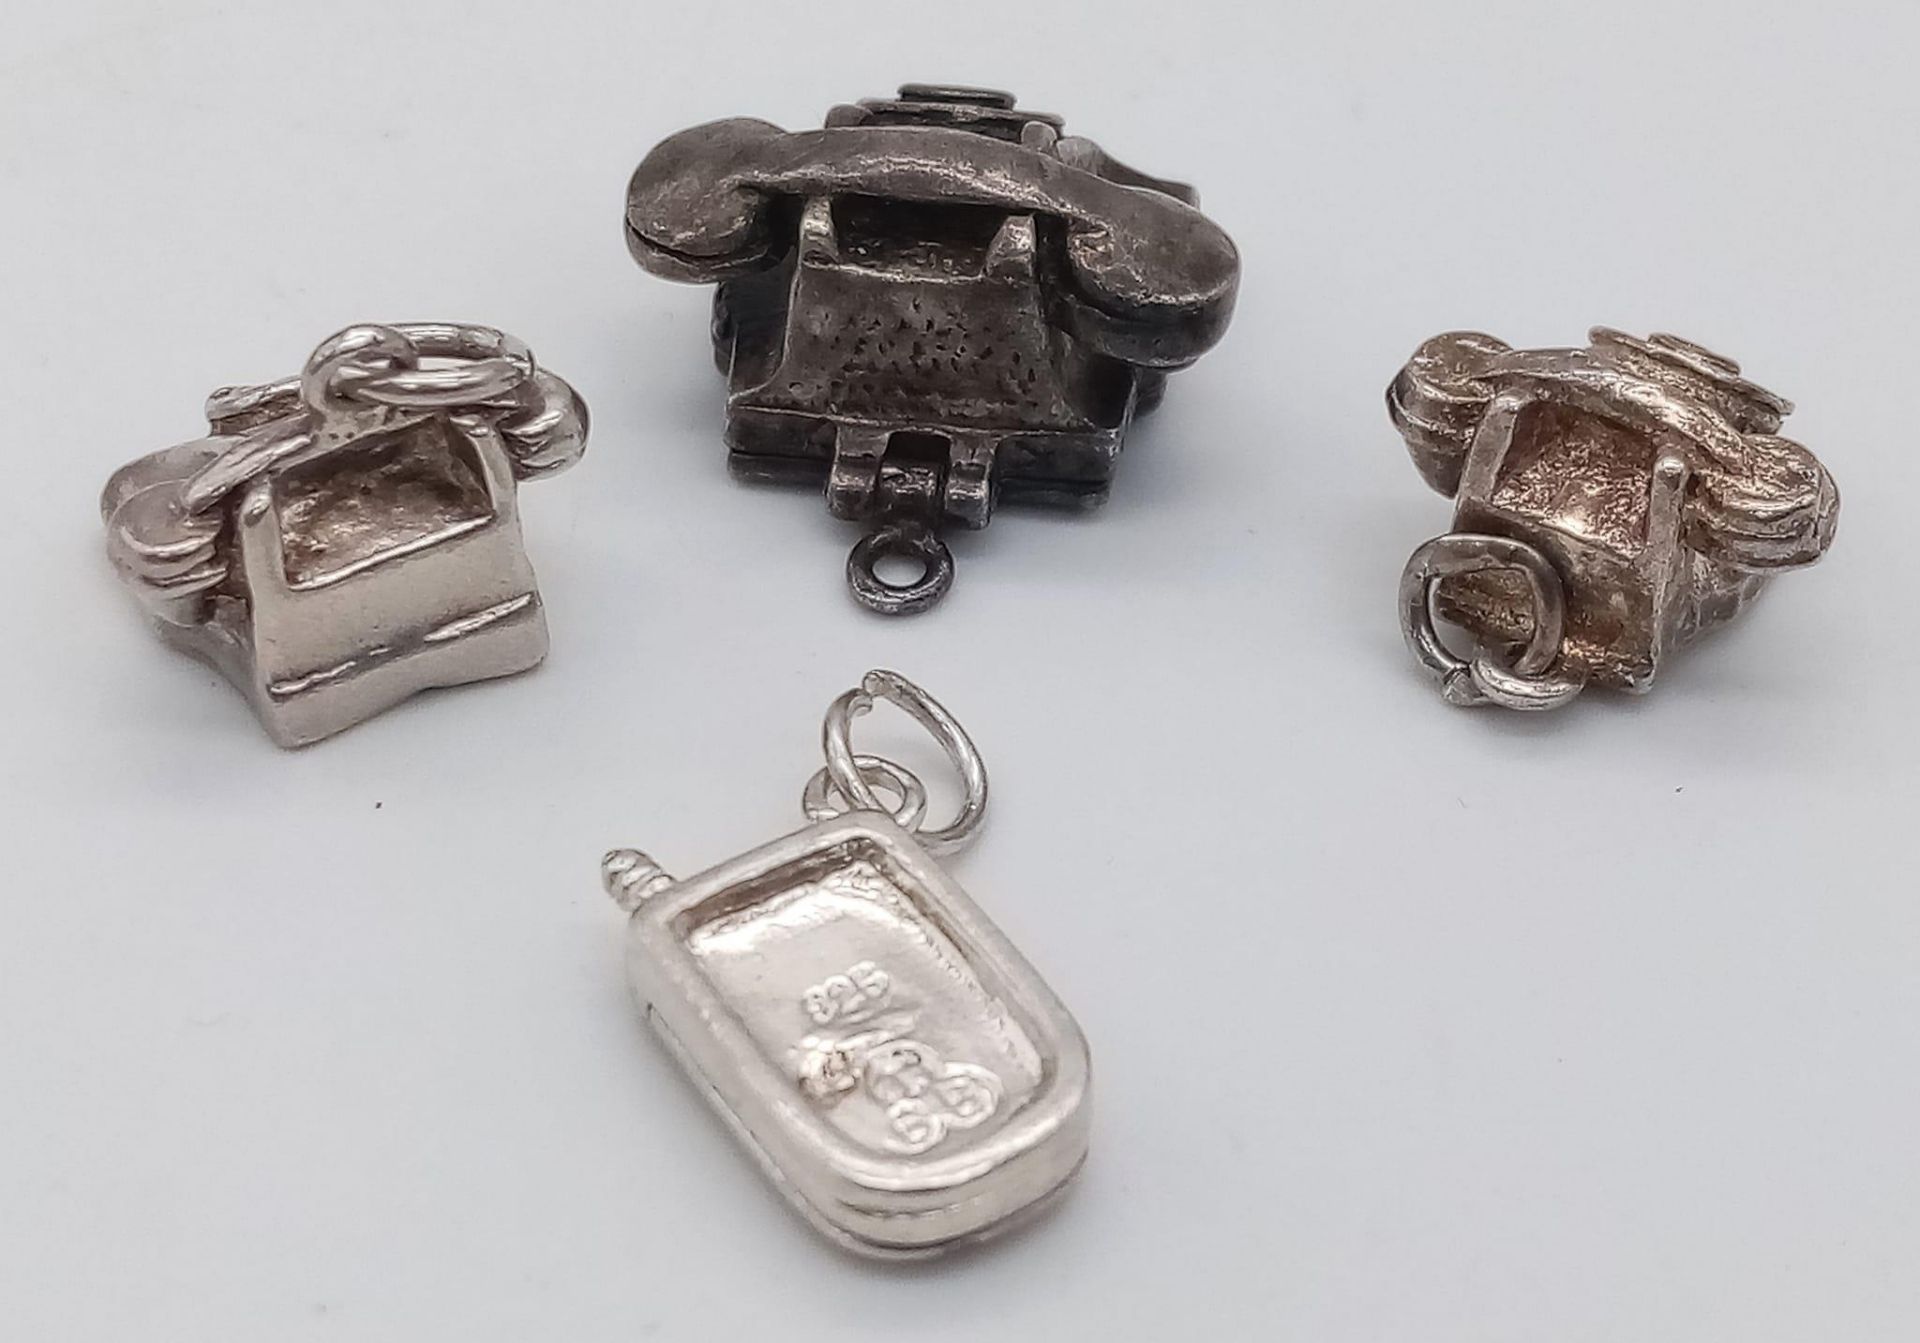 4 X STERLING SILVER TELEPHONE CHARMS - 3 OLD SCHOOL PHONES AND A FLIP MOBILE. 14.5G - Bild 2 aus 3